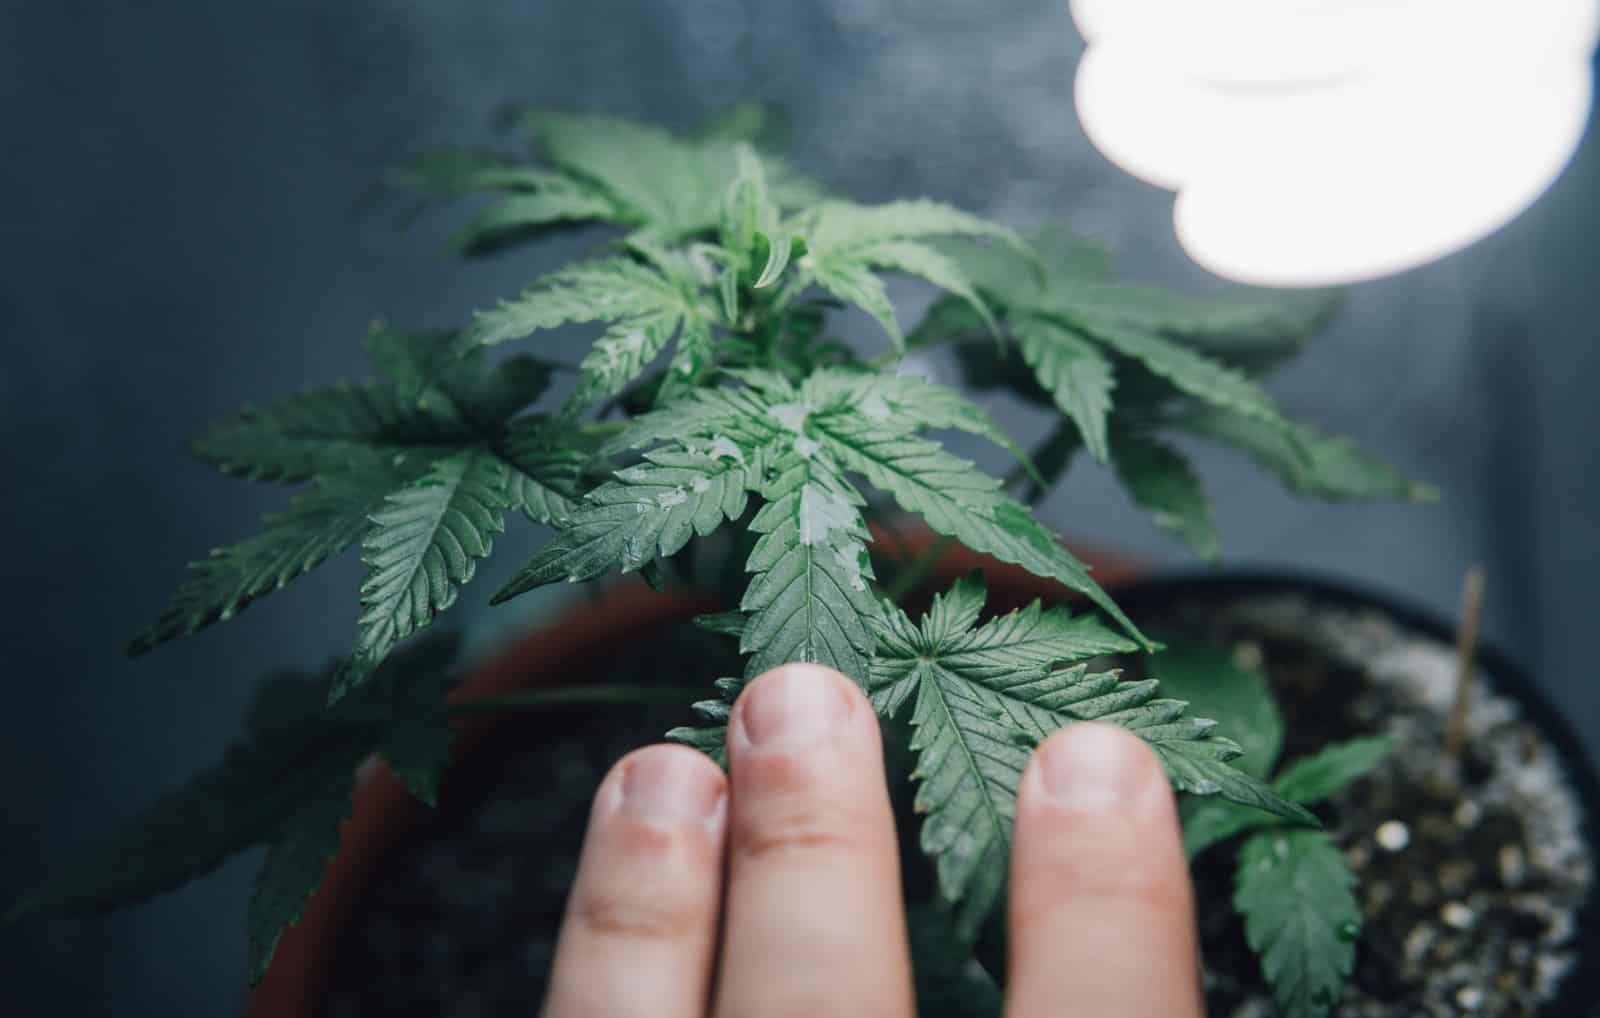 What’s The Best Soil For Growing Weed?